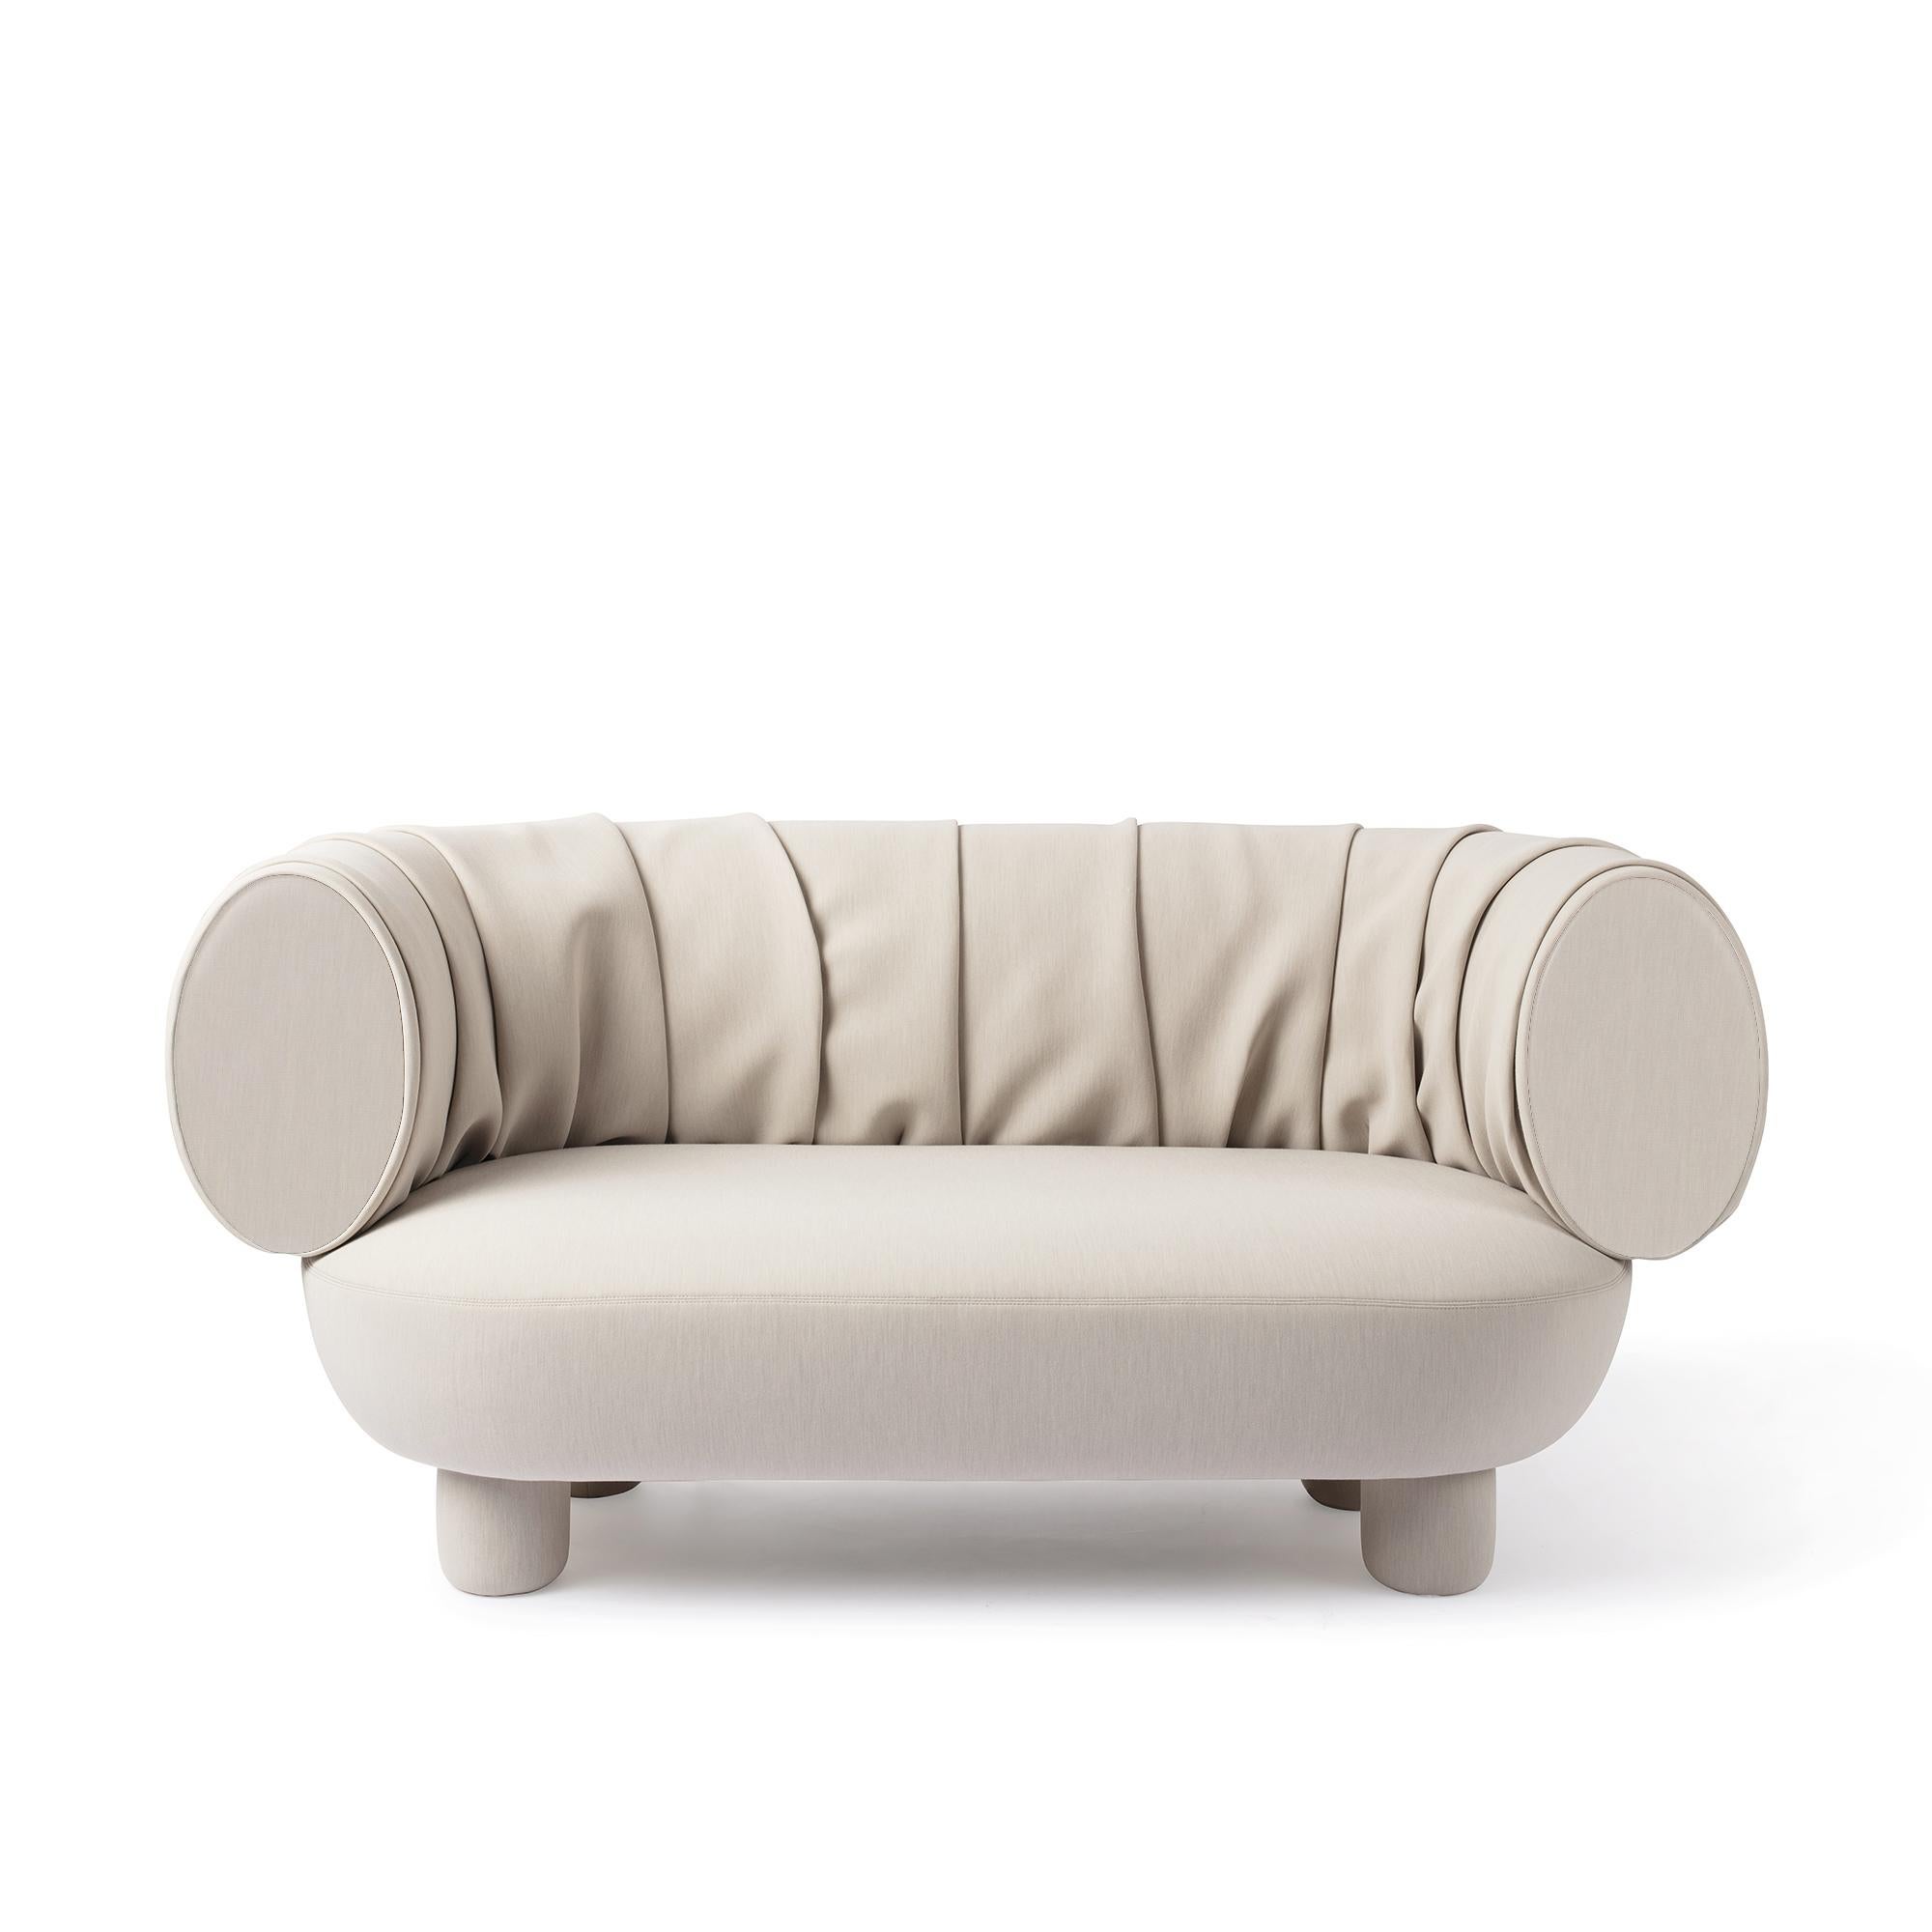 Sumo sofa designed by Thomas Dariel
L 185 x D 80 x H 80 cm
Structure in solid timber and plywood
Memory Foam
Legs and seating fully upholstered in fabric
Recommended fabric • Febrik Uniform Melange Collection from Kvadrat
Other fabric